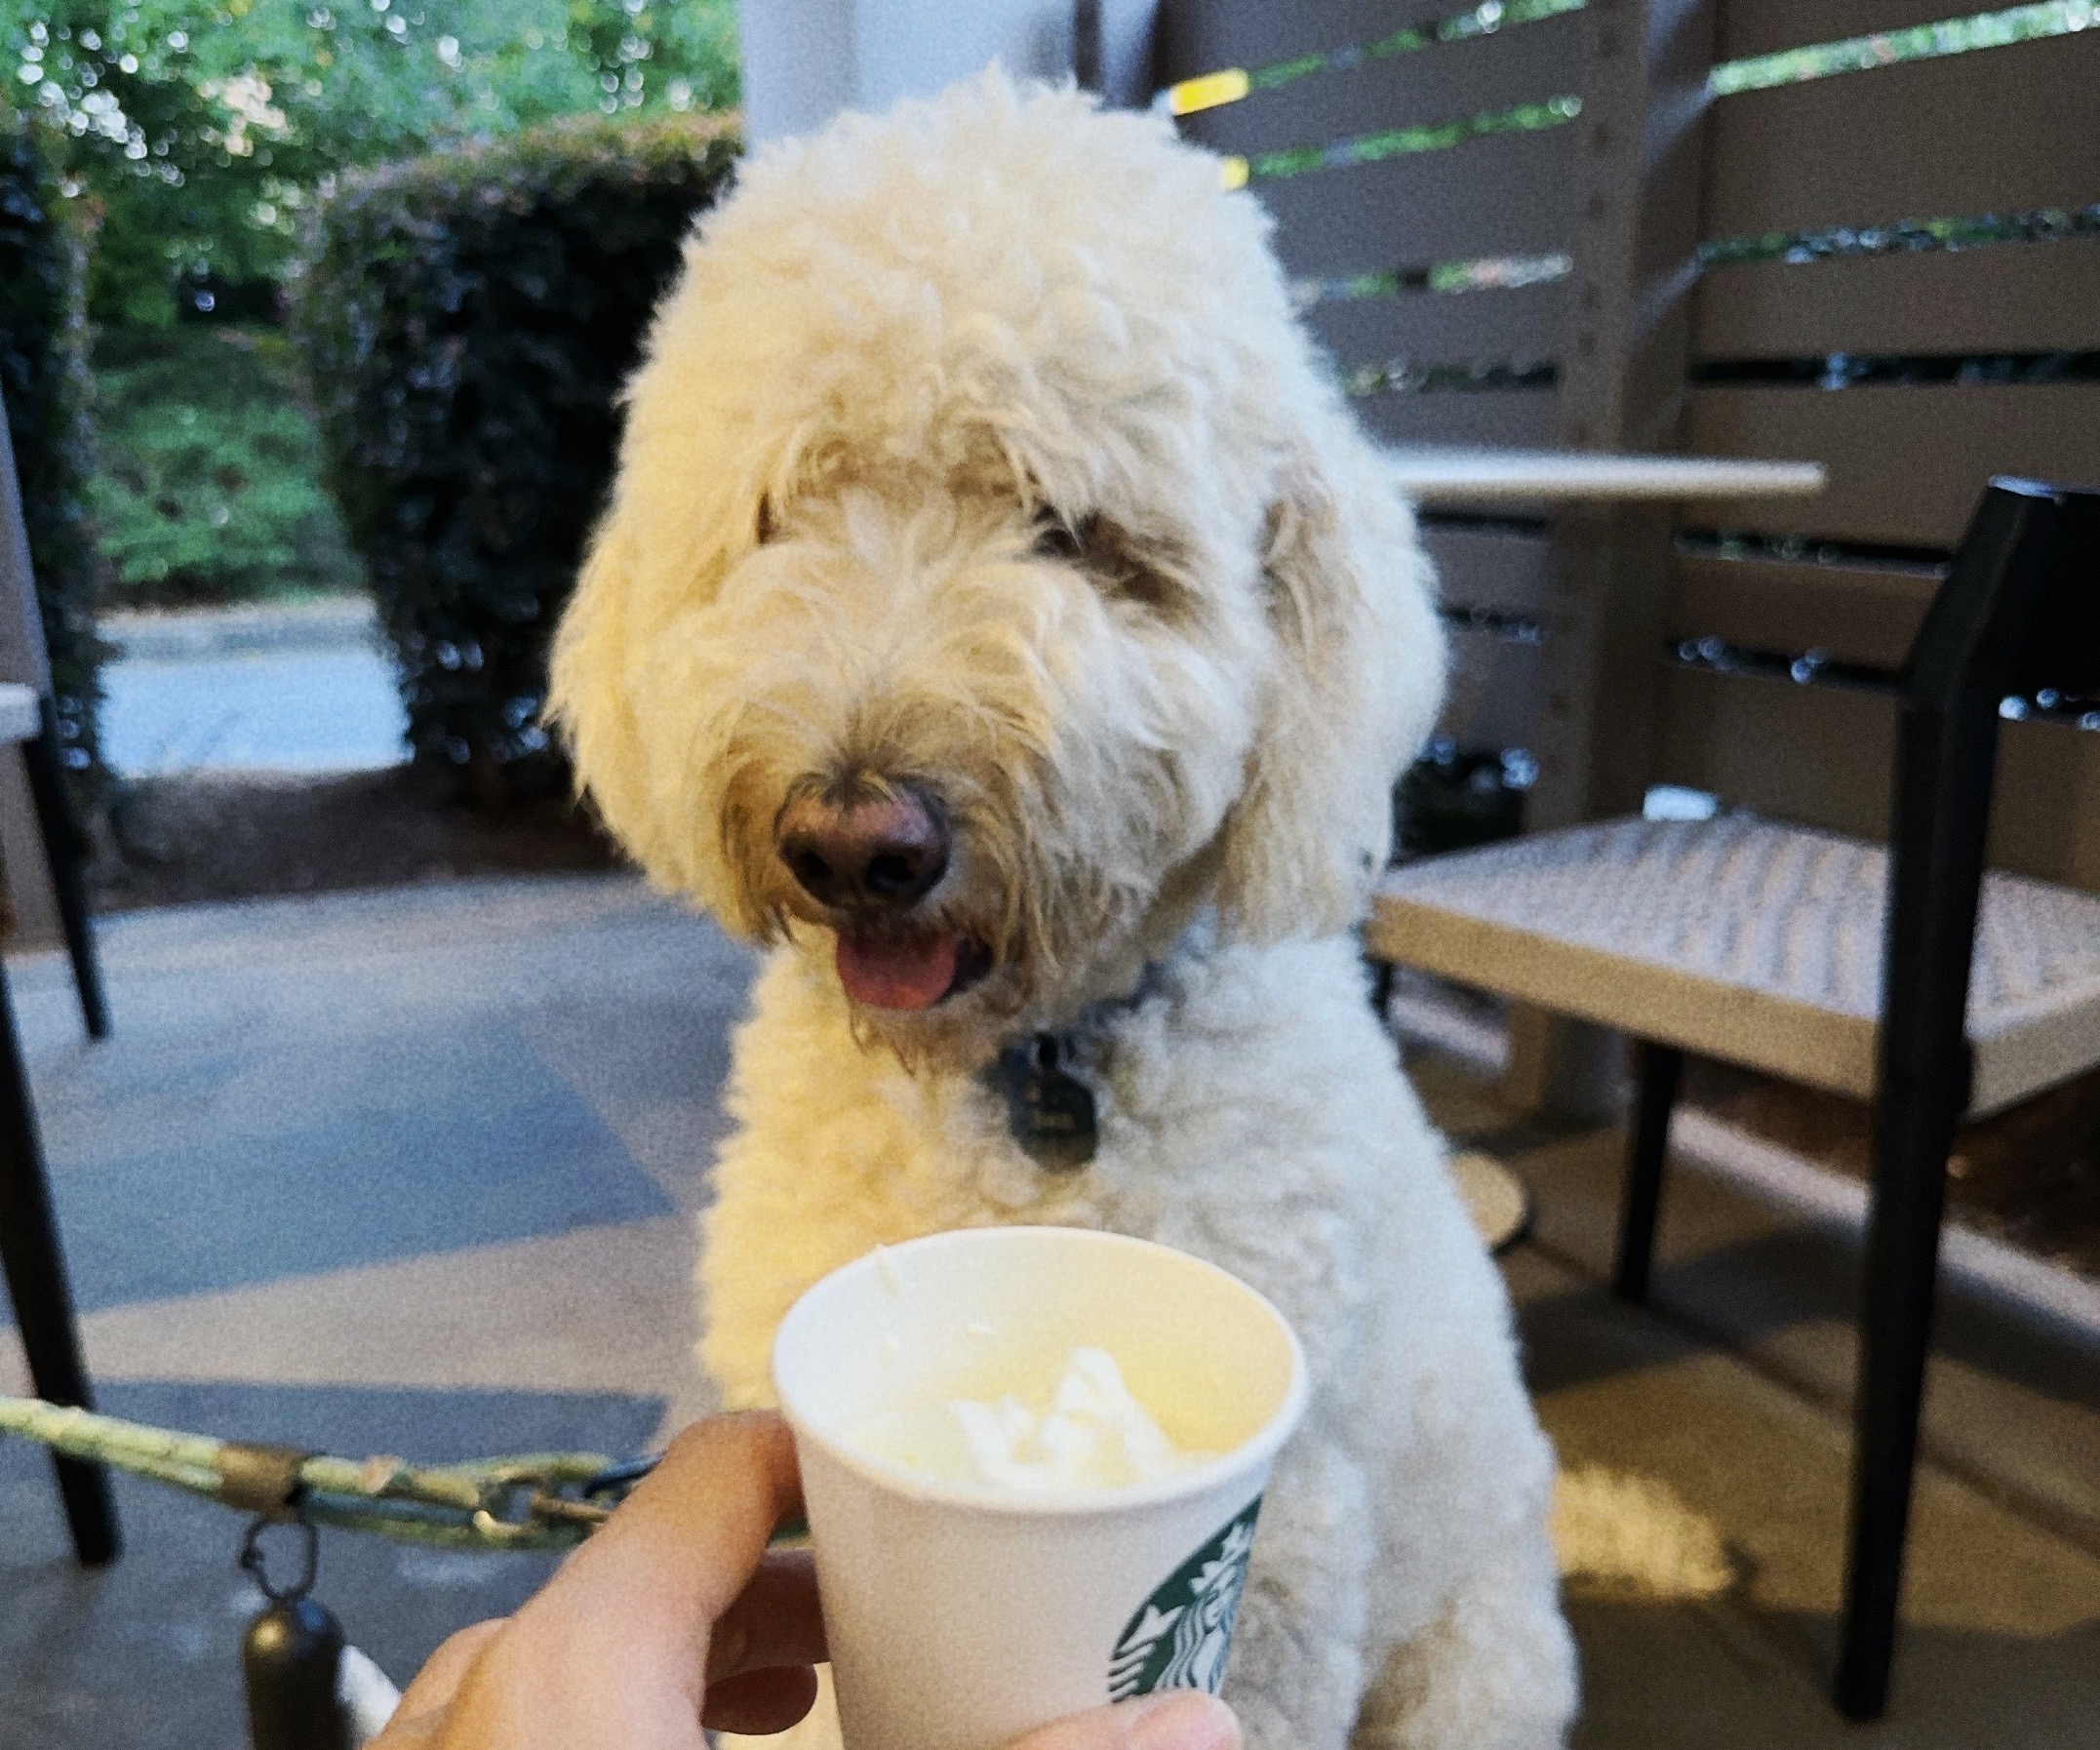 Ben and a pup cup